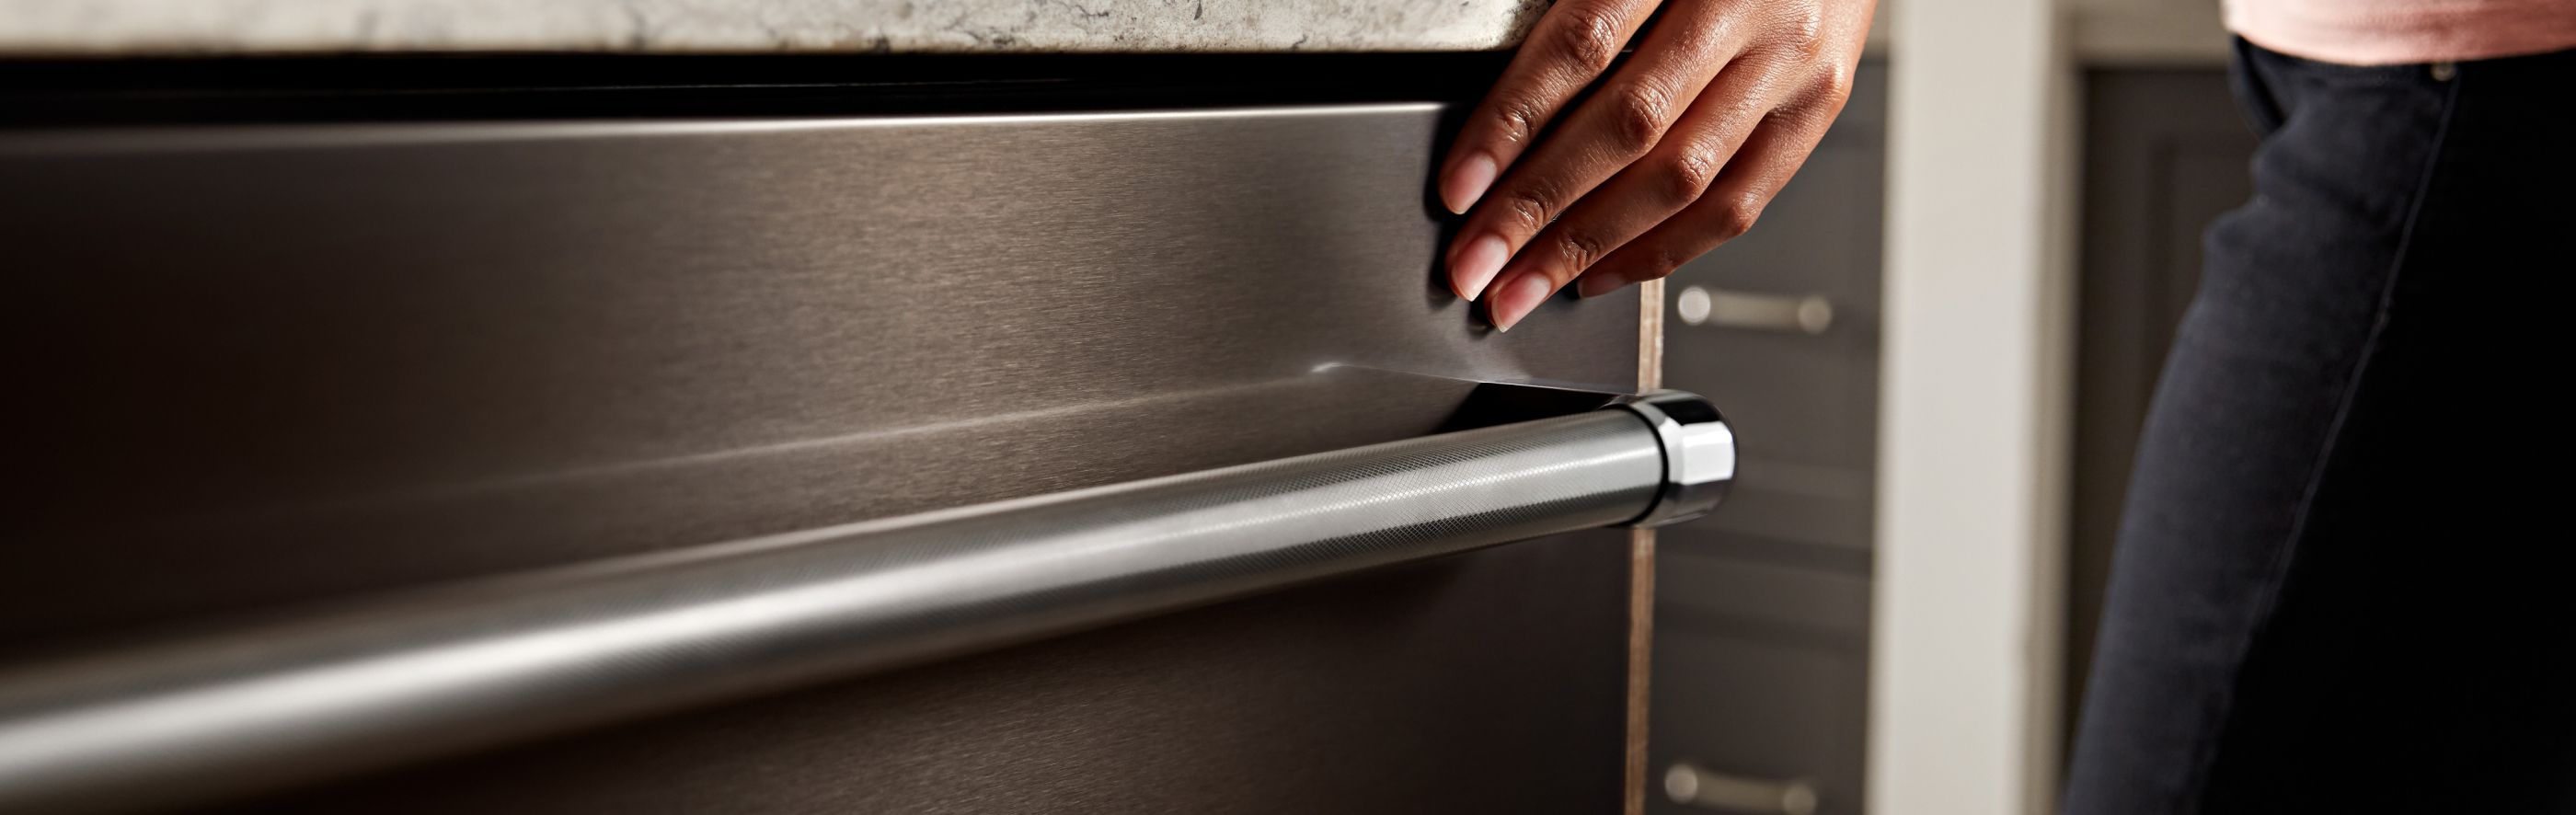 Hand closing a stainless steel dishwasher